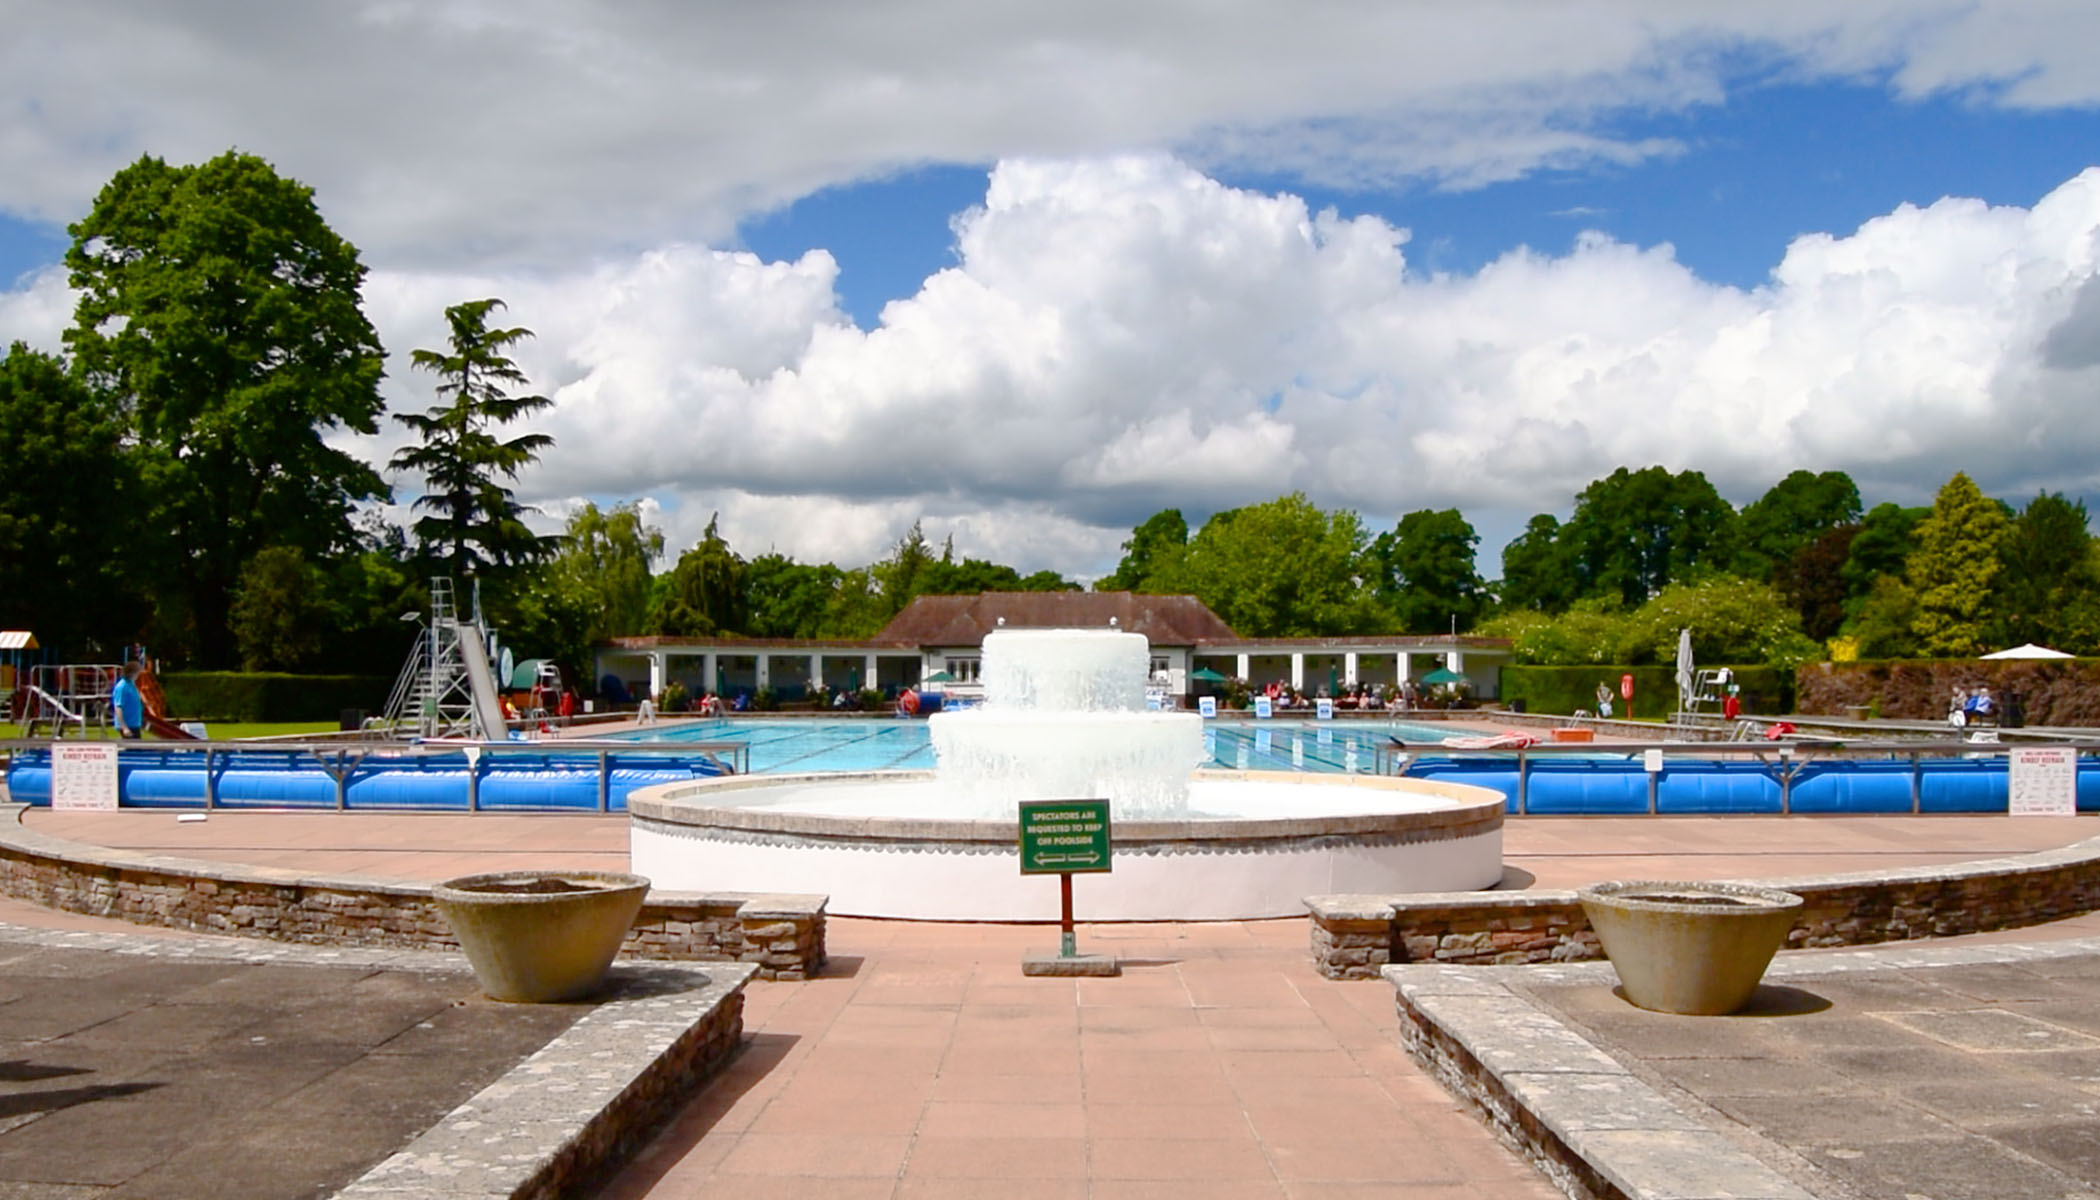 View of the fountain and pool at Sandford Parks Lido